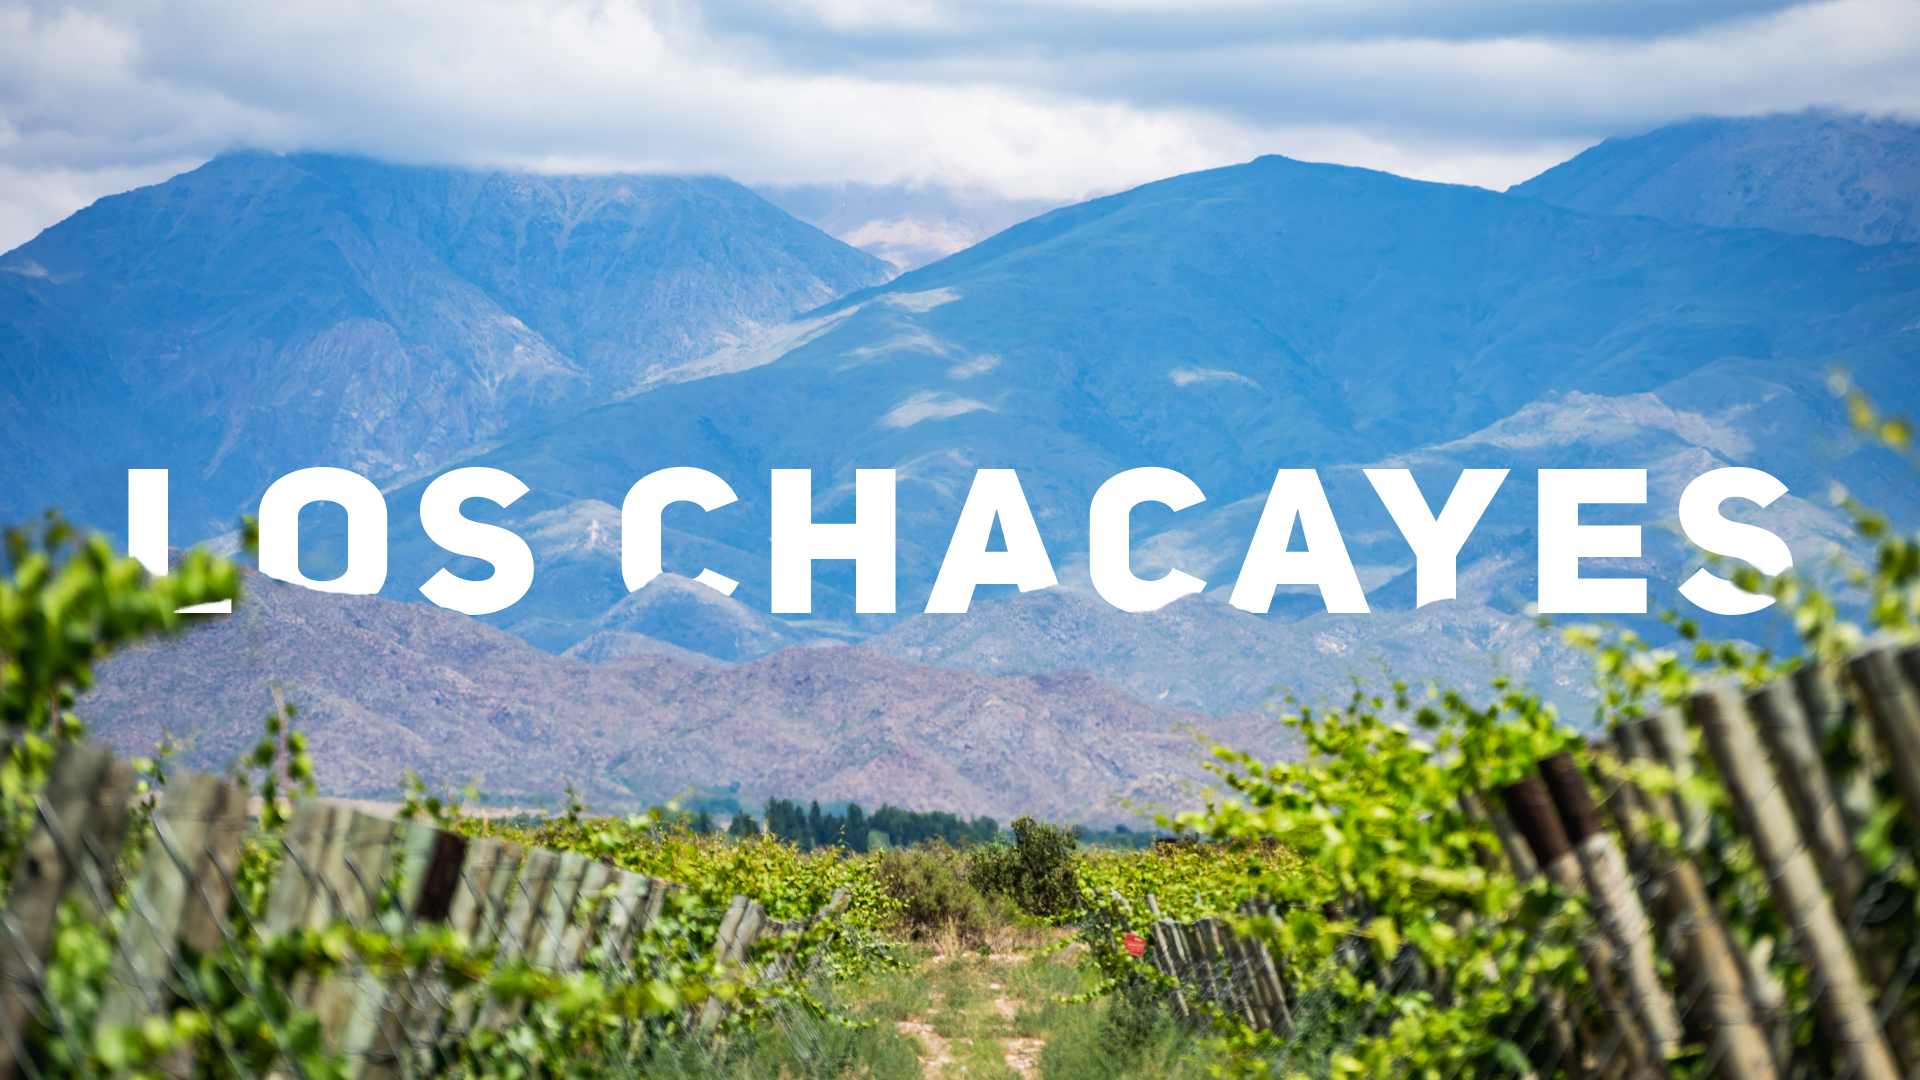 Guide to Los Chacayes GI in Uco, Mendoza. A guide to the producers, wines and Los Chacayes wine region